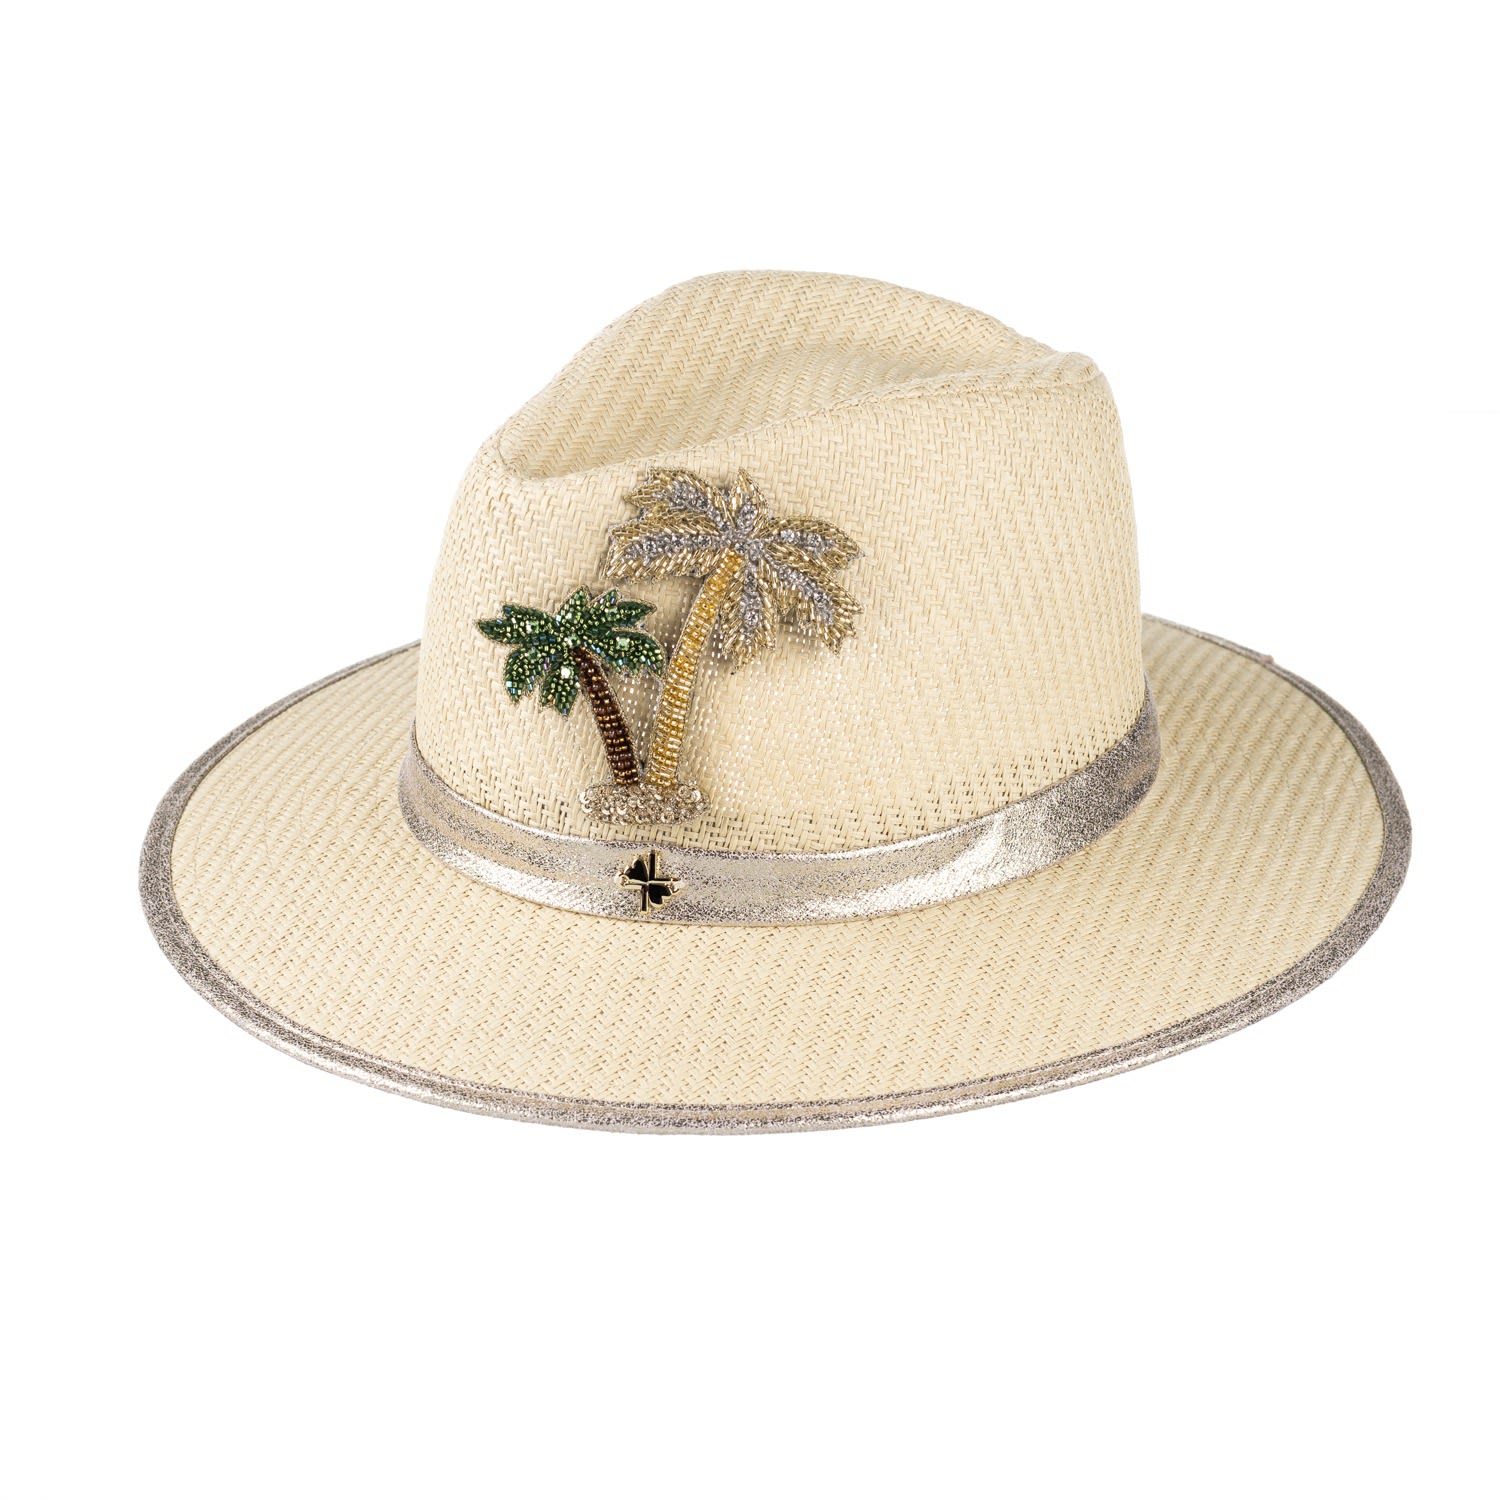 Laines London Women's Neutrals Straw Woven Hat With Couture Embellished Golden Palm Tree Brooch - Cream In White/yellow